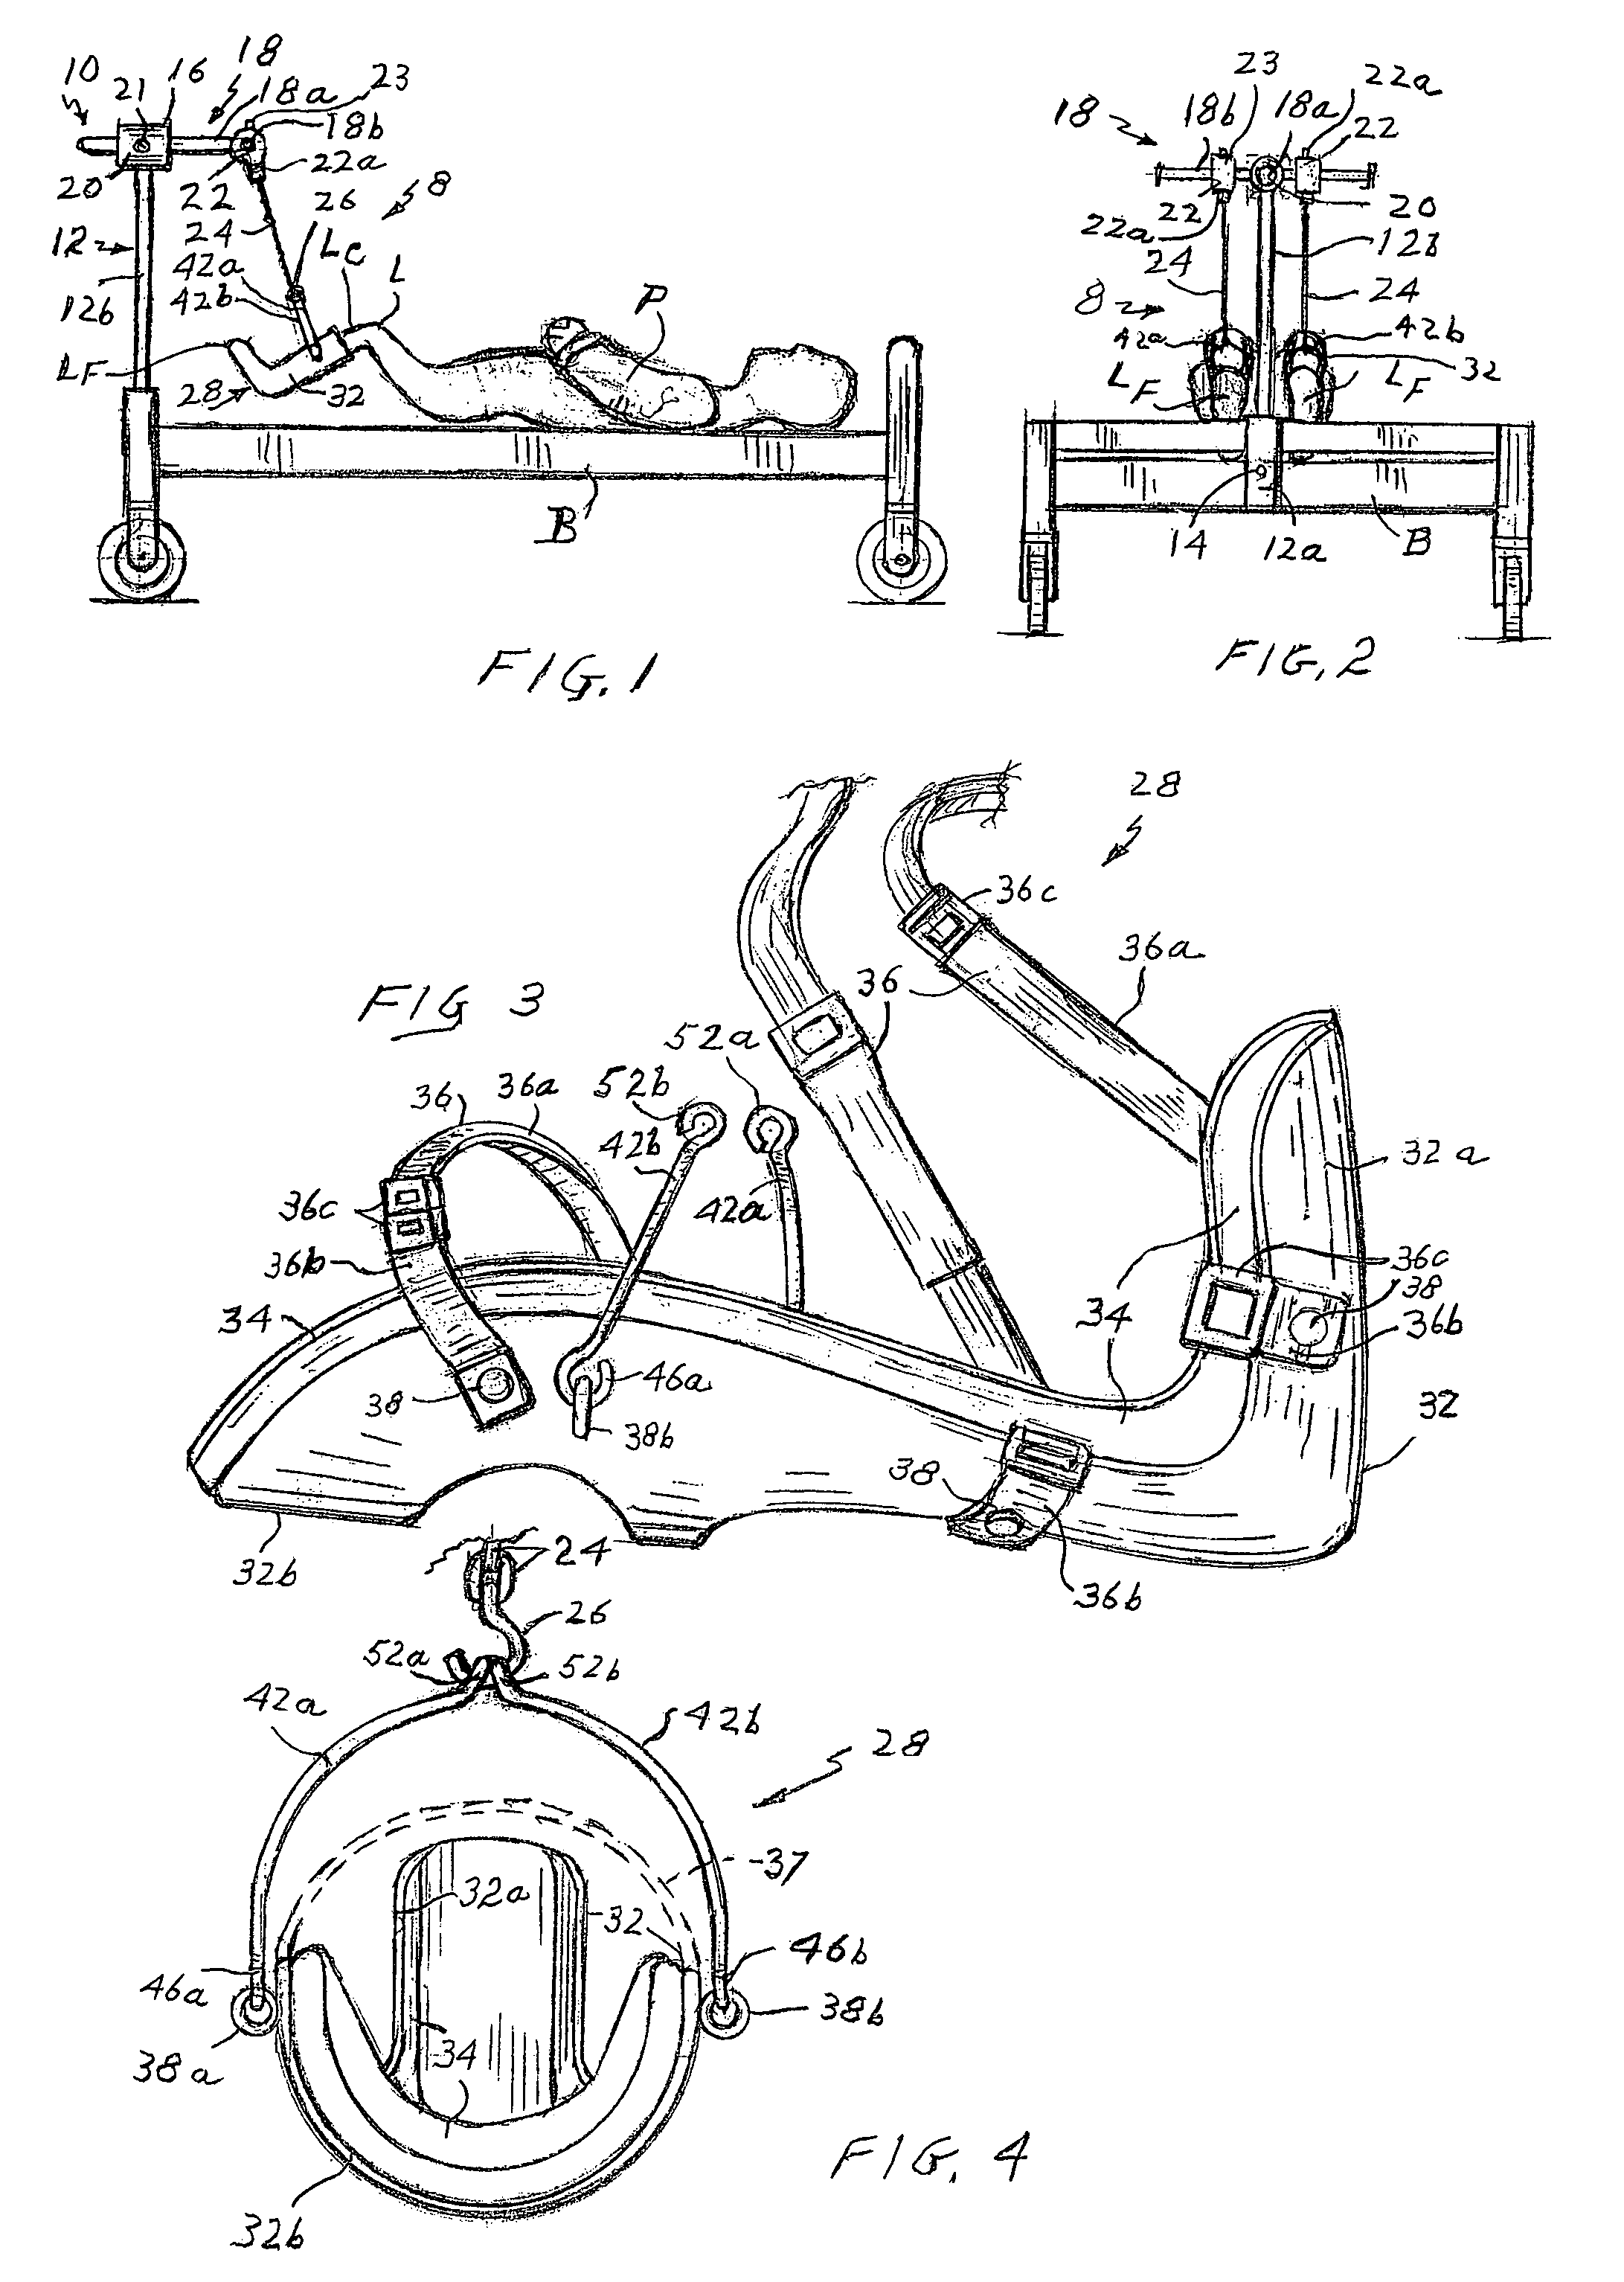 Method and apparatus for minimizing bed sores and lower back pain in spinal injury patients